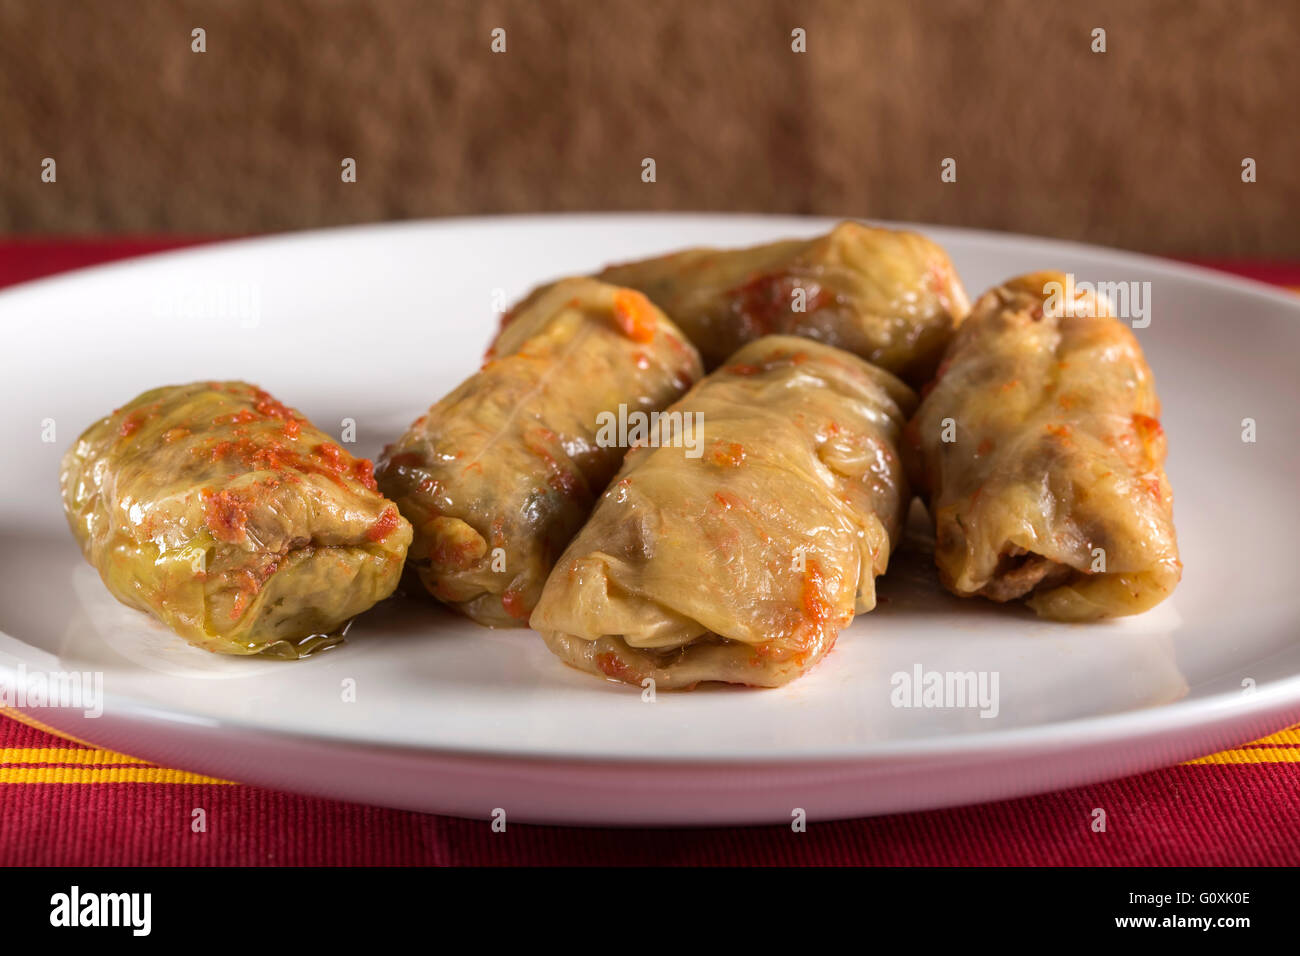 Stuffed cabbage rolls with tomato sauce Stock Photo